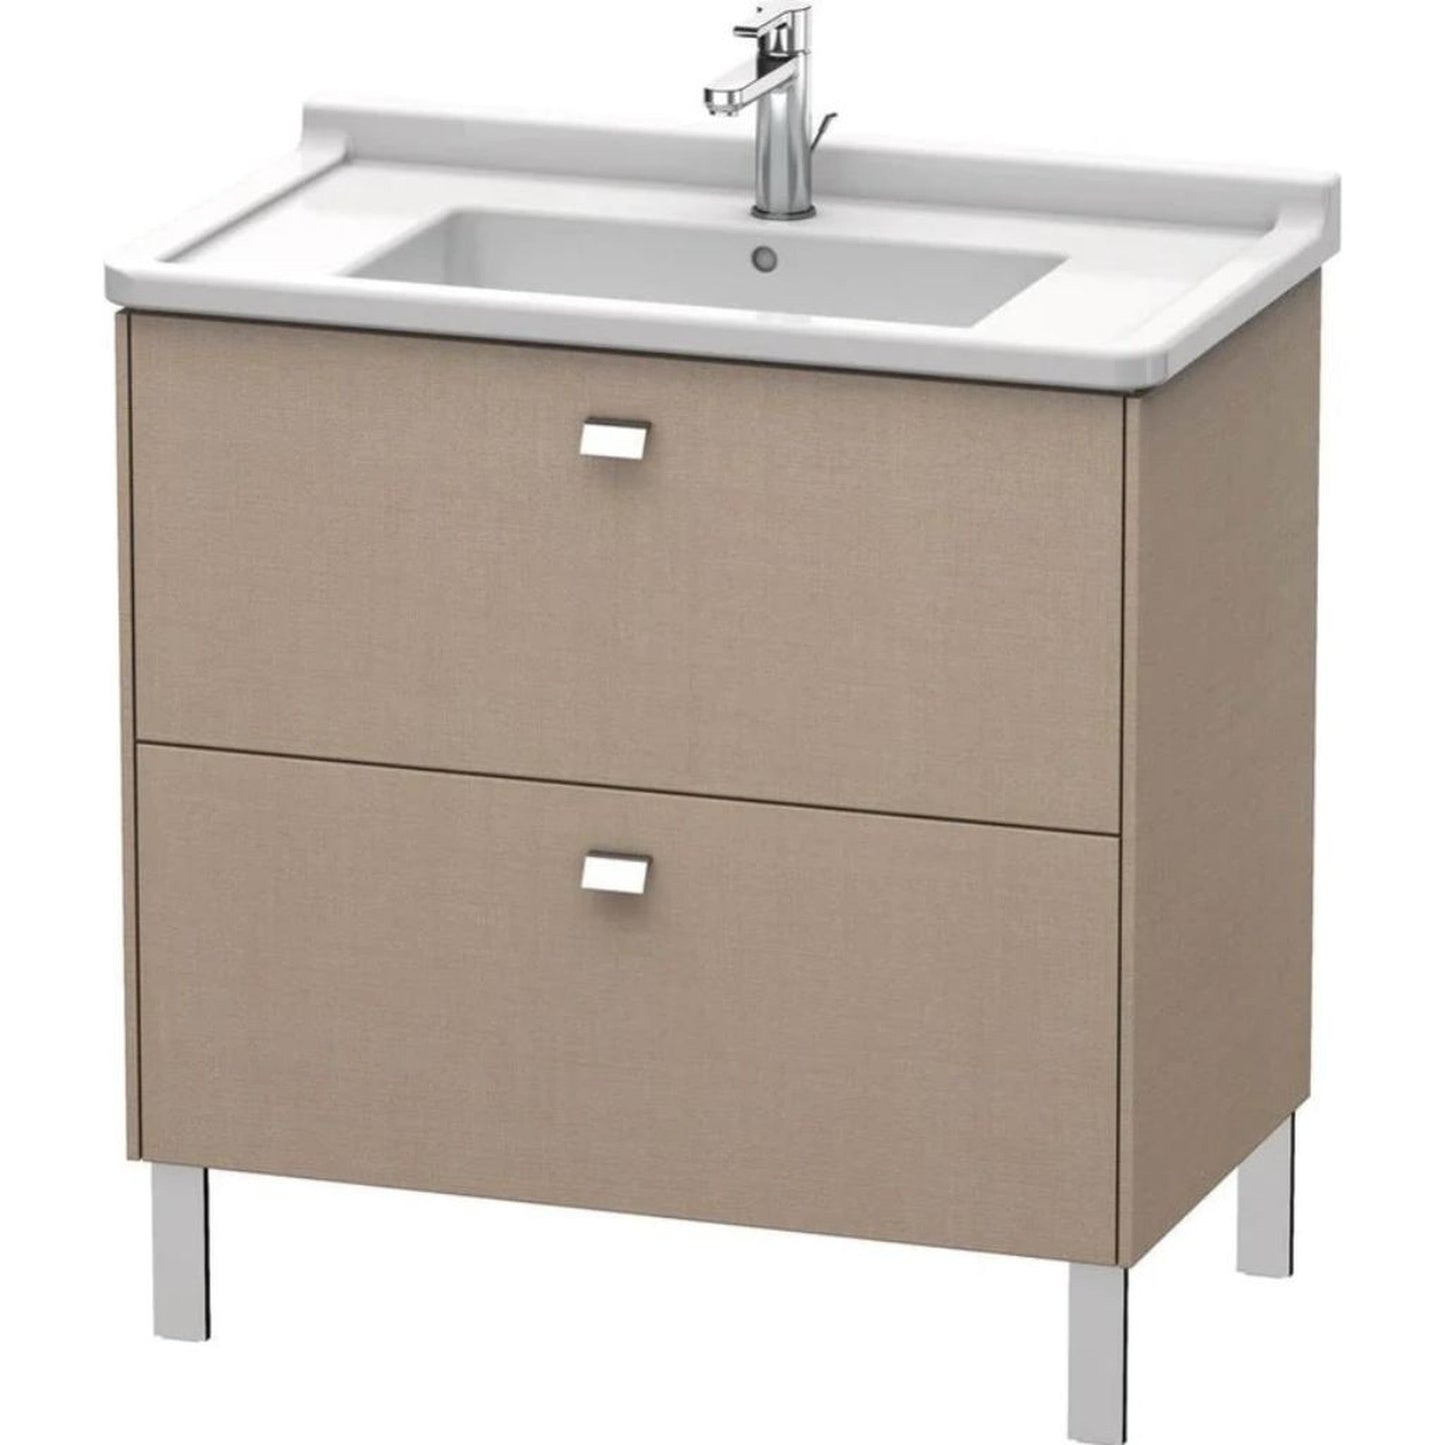 Duravit Brioso BR44220 32" x 27" x 18" Two Drawer Floor Standing Vanity Unit in Linen and Chrome Handle